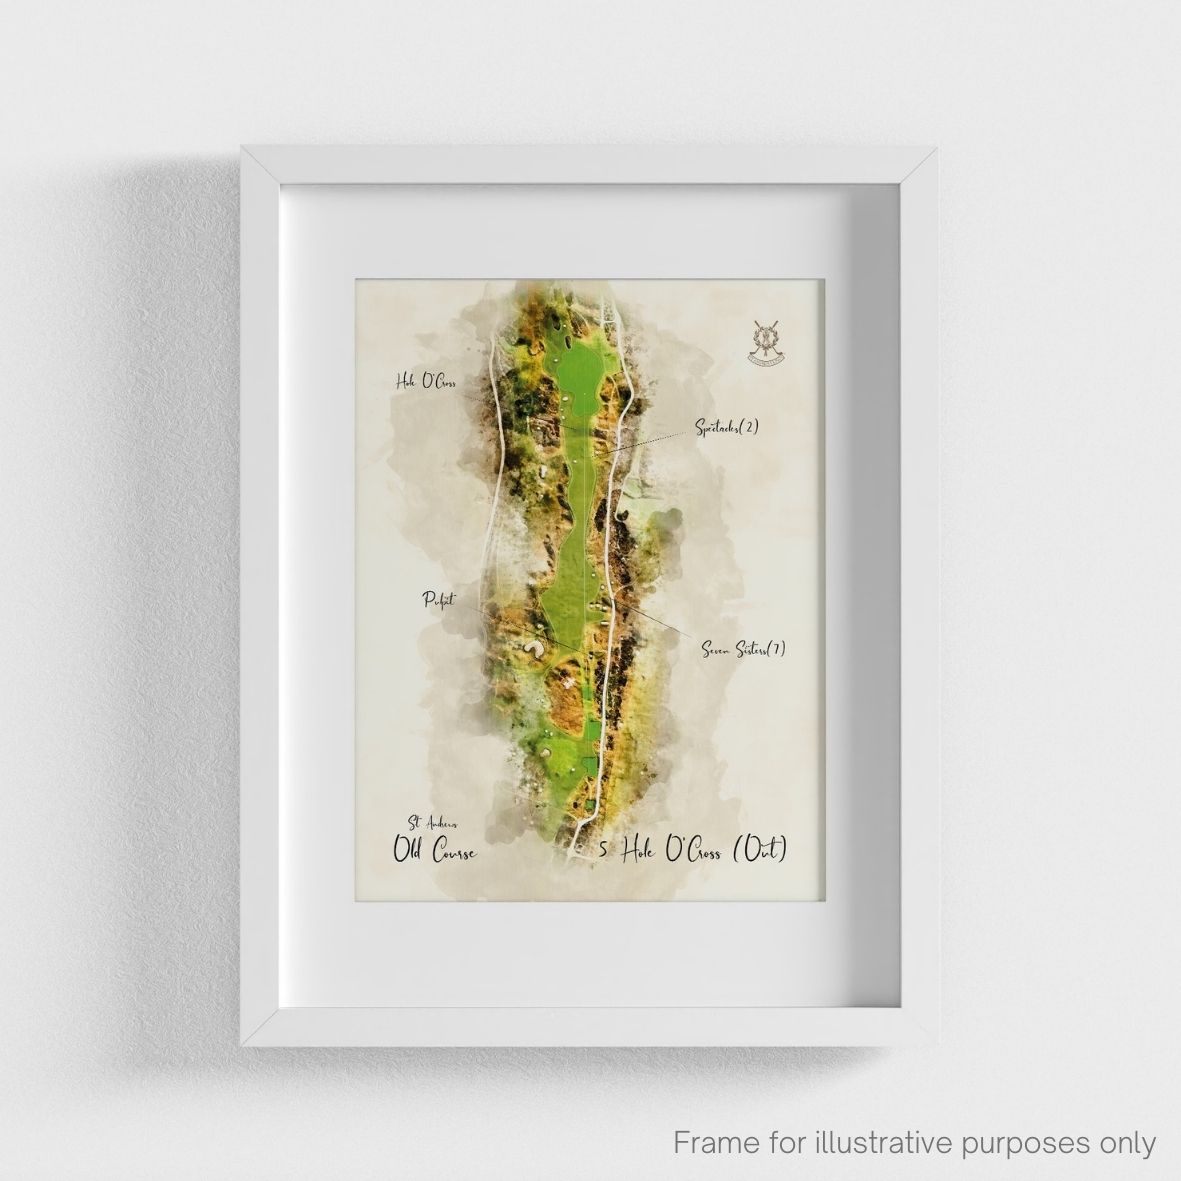 St Andrews Hole 5 WaterMap Print shown in a white frame